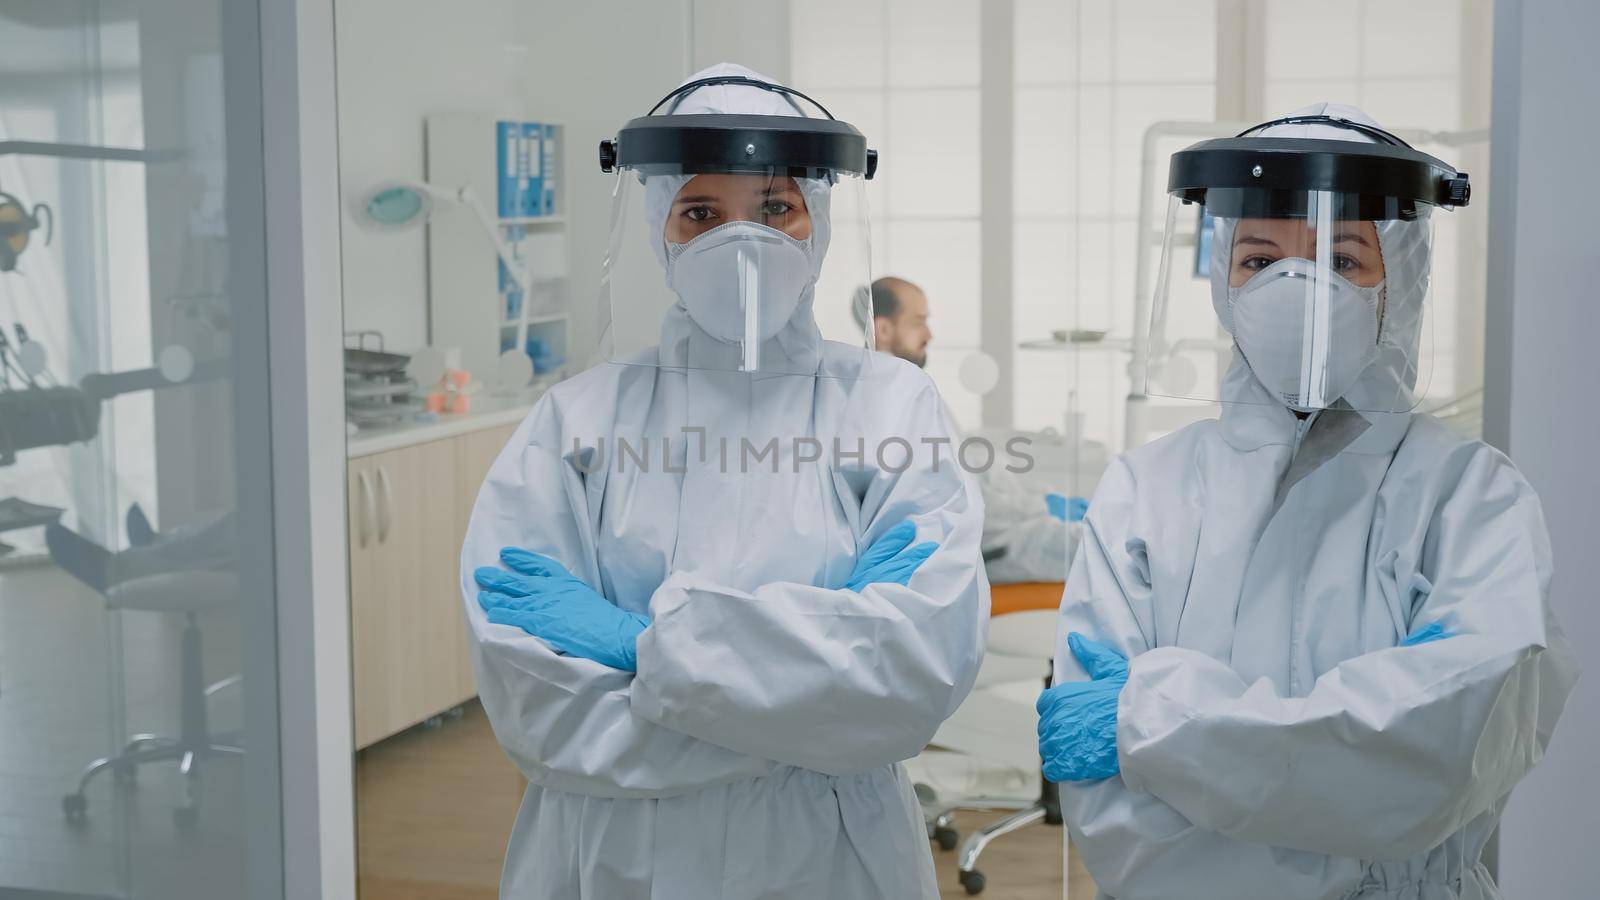 Professional team of dentists in ppe suits standing by DCStudio